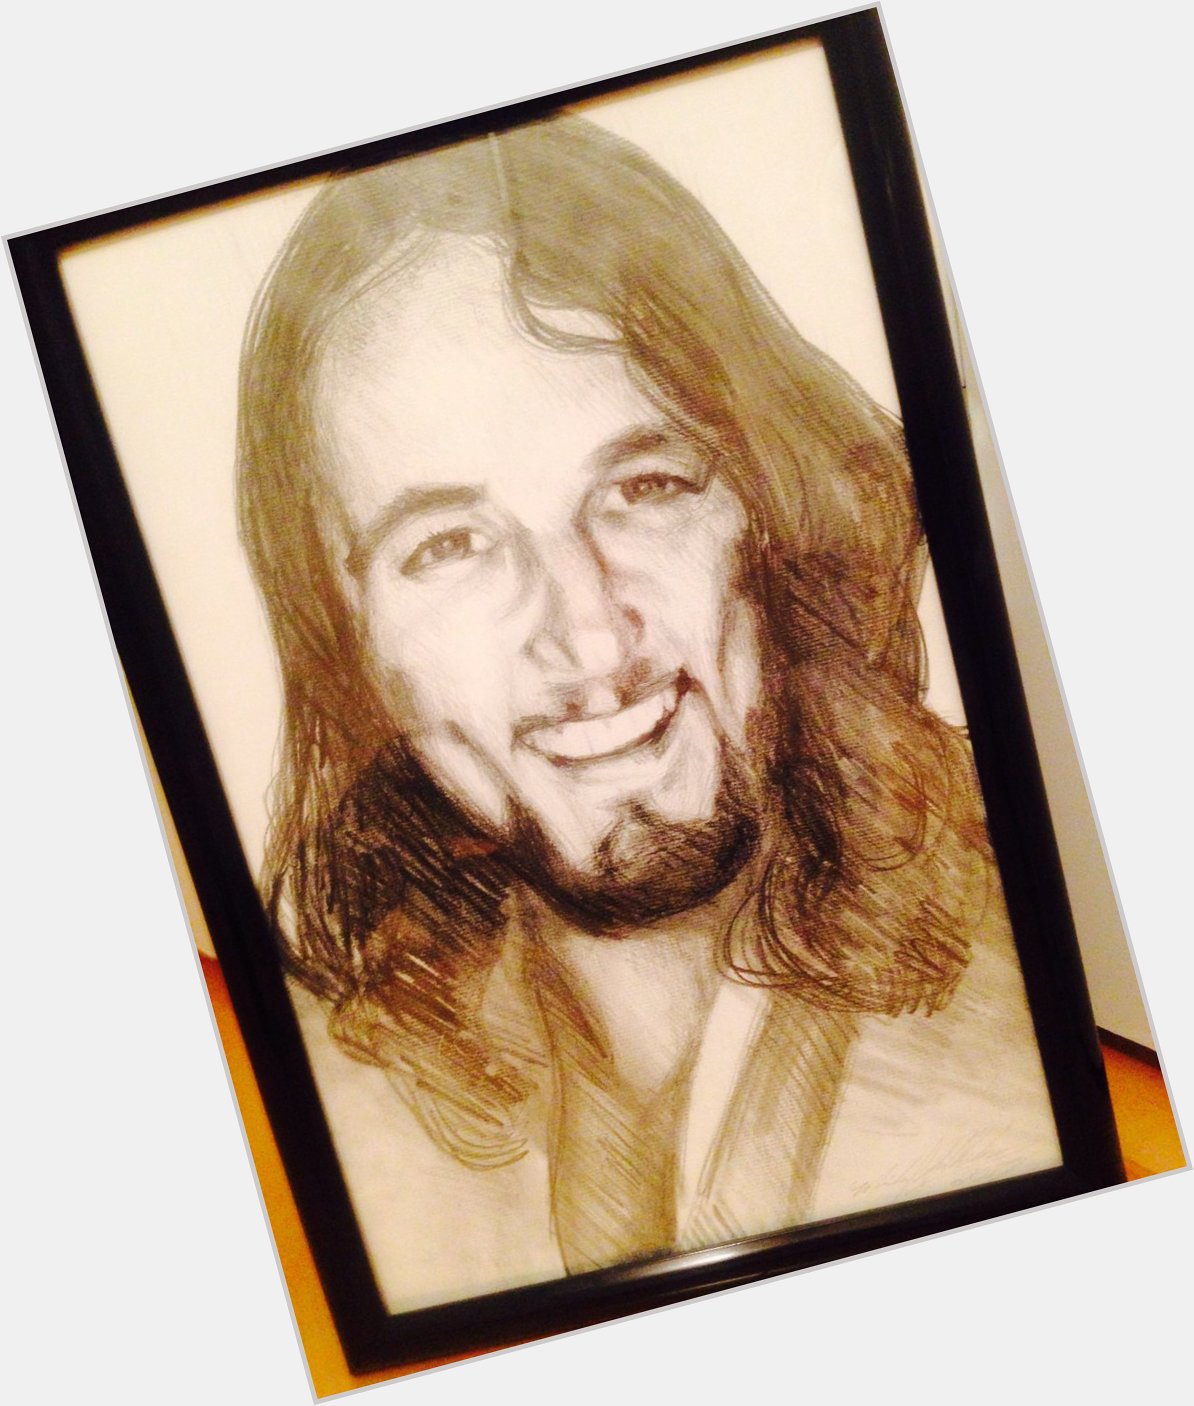 Happy Birthday Roger Hodgson  from one of your biggest fans. March 21,2017     